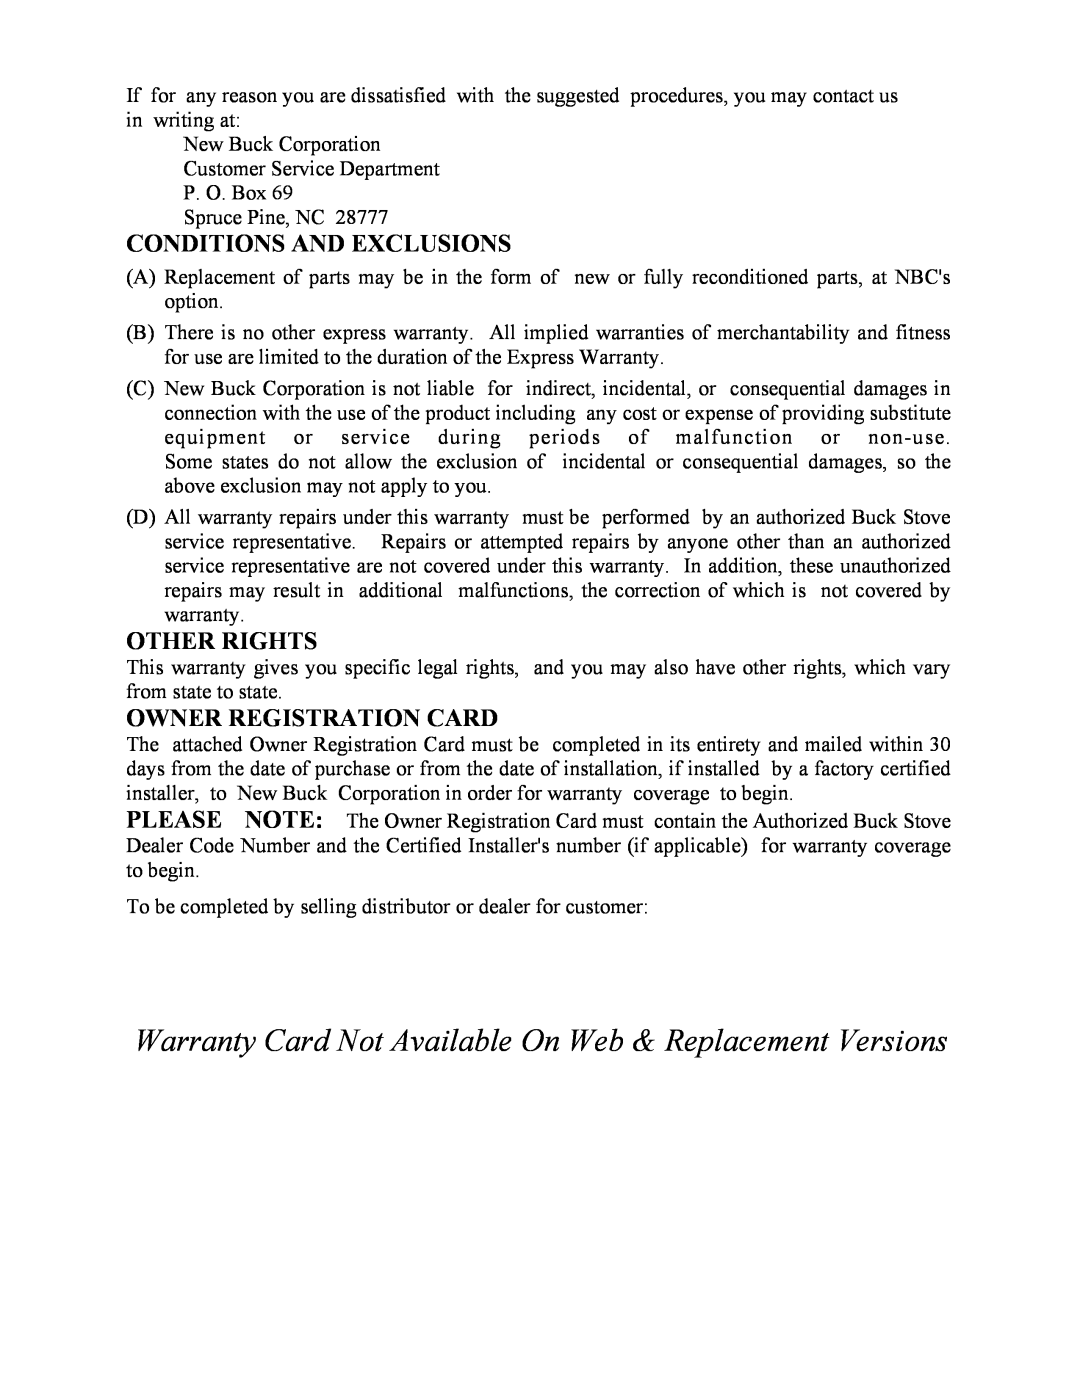 New Buck Corporation FS 21 installation instructions Conditions And Exclusions, Other Rights, Owner Registration Card 